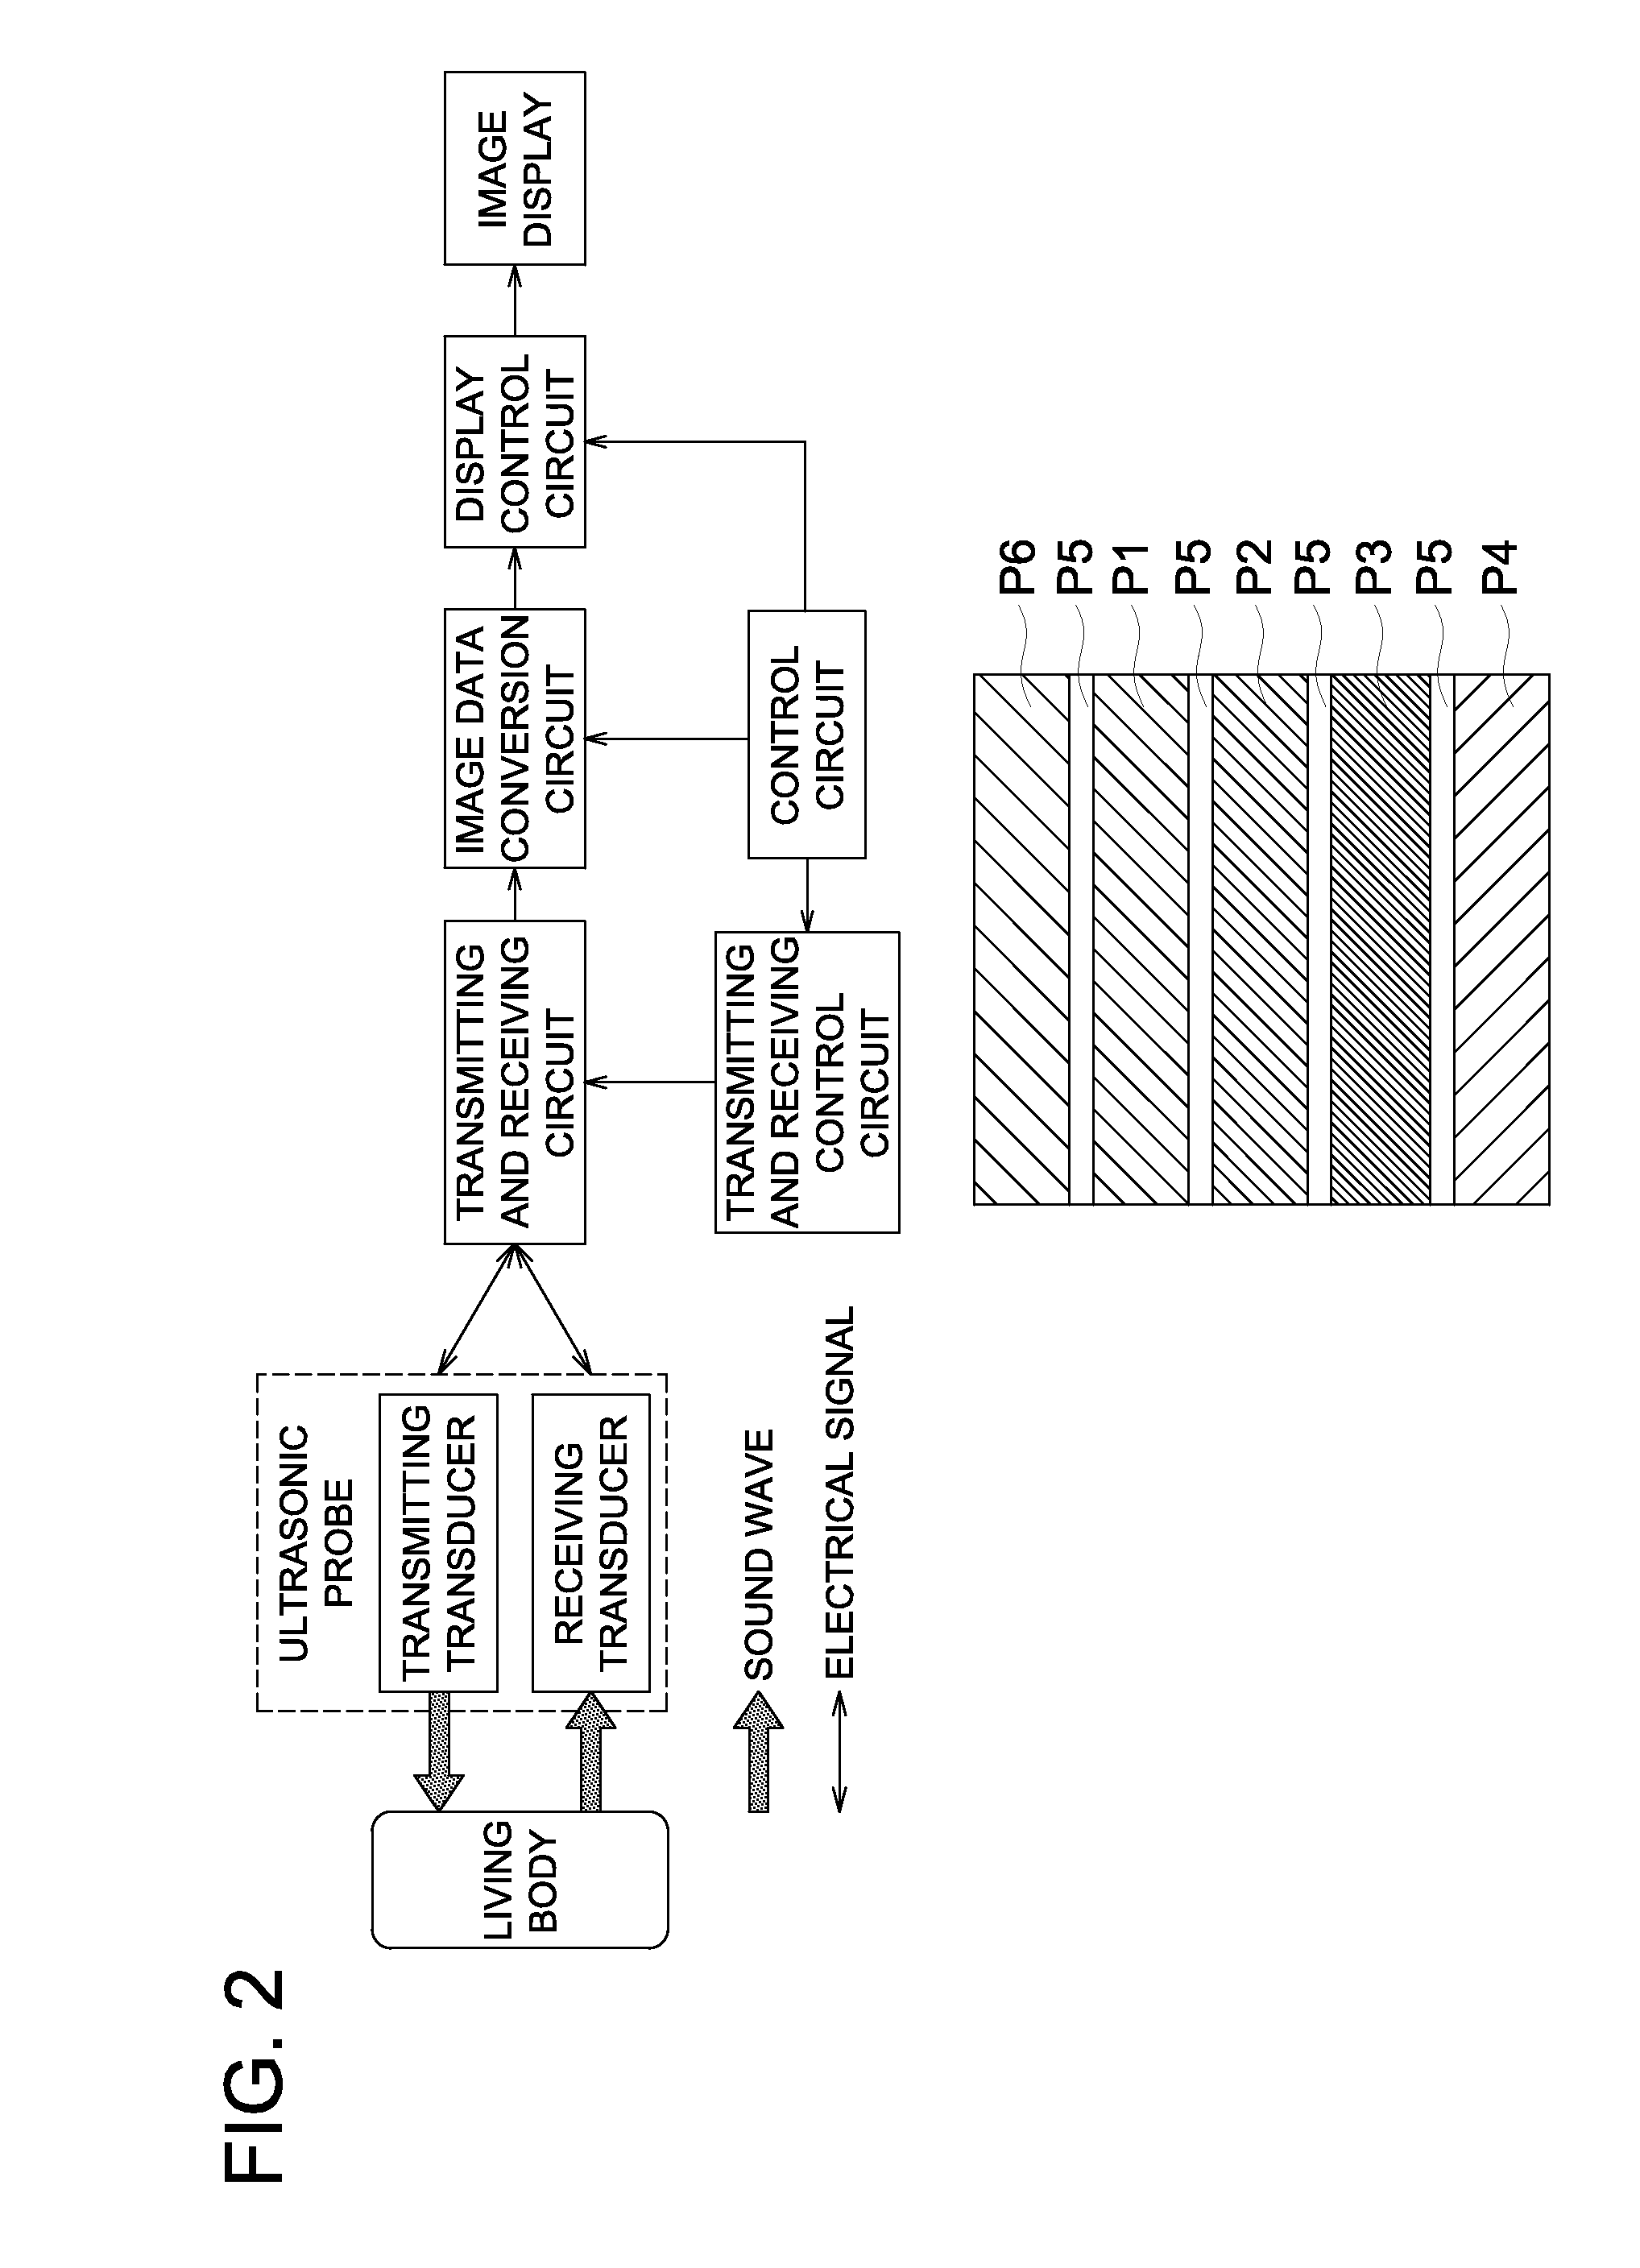 Organic piezoelectric material, ultrasonic oscillator using the same, method for producing the ultrasonic oscillator, ultrasonic probe and ultrasonic medical diagnostic imaging device